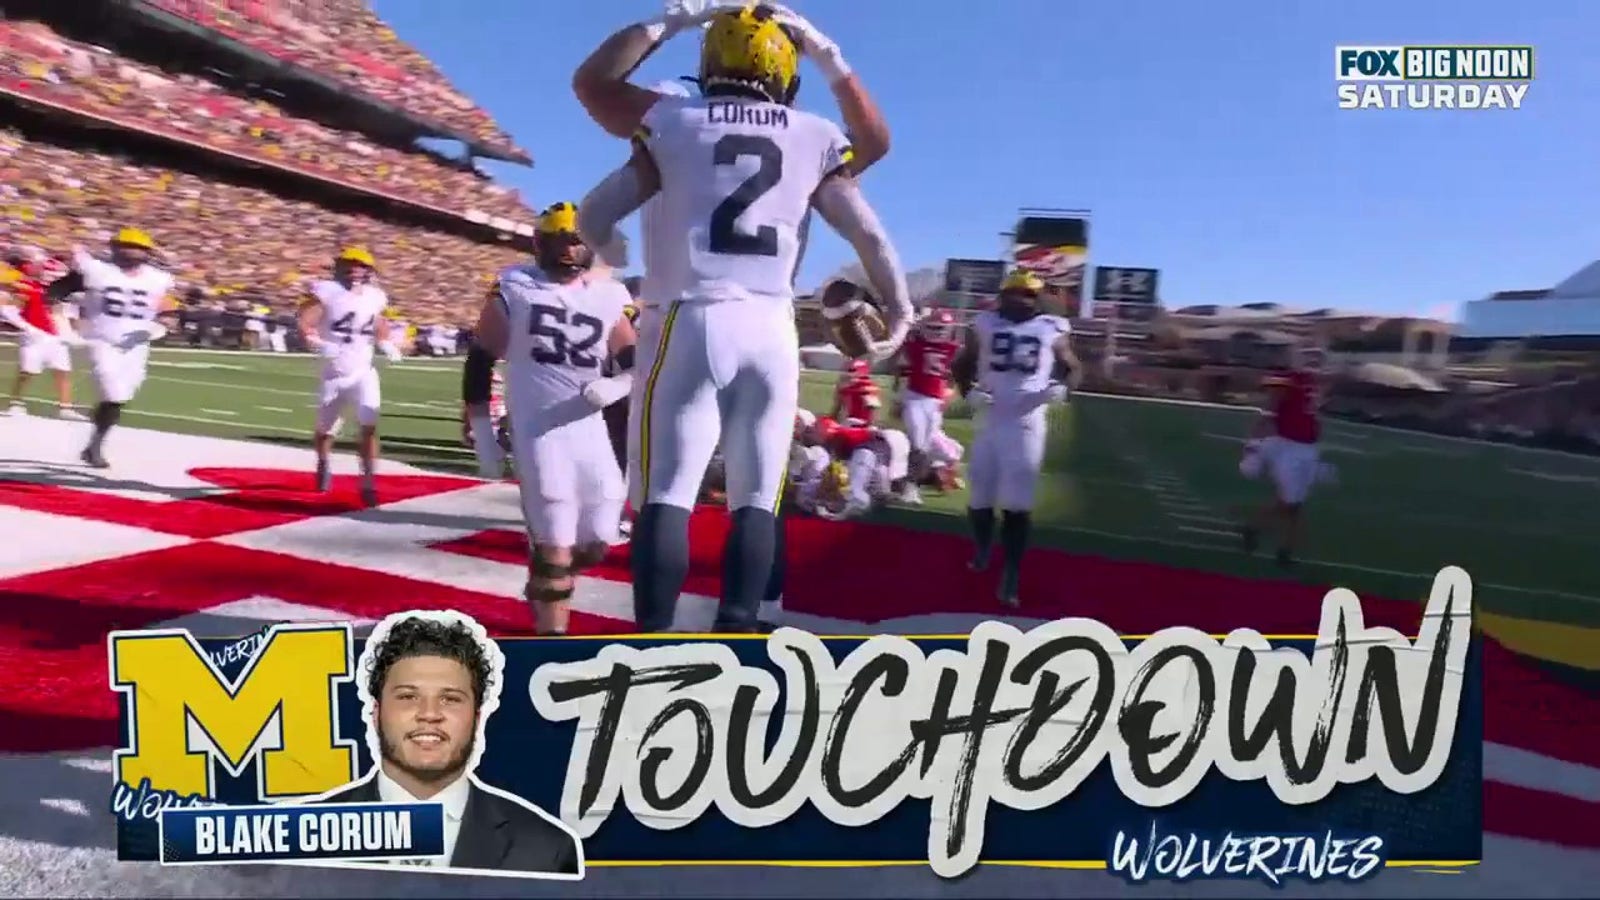 Michigan's Blake Corum scores his second TD of the day